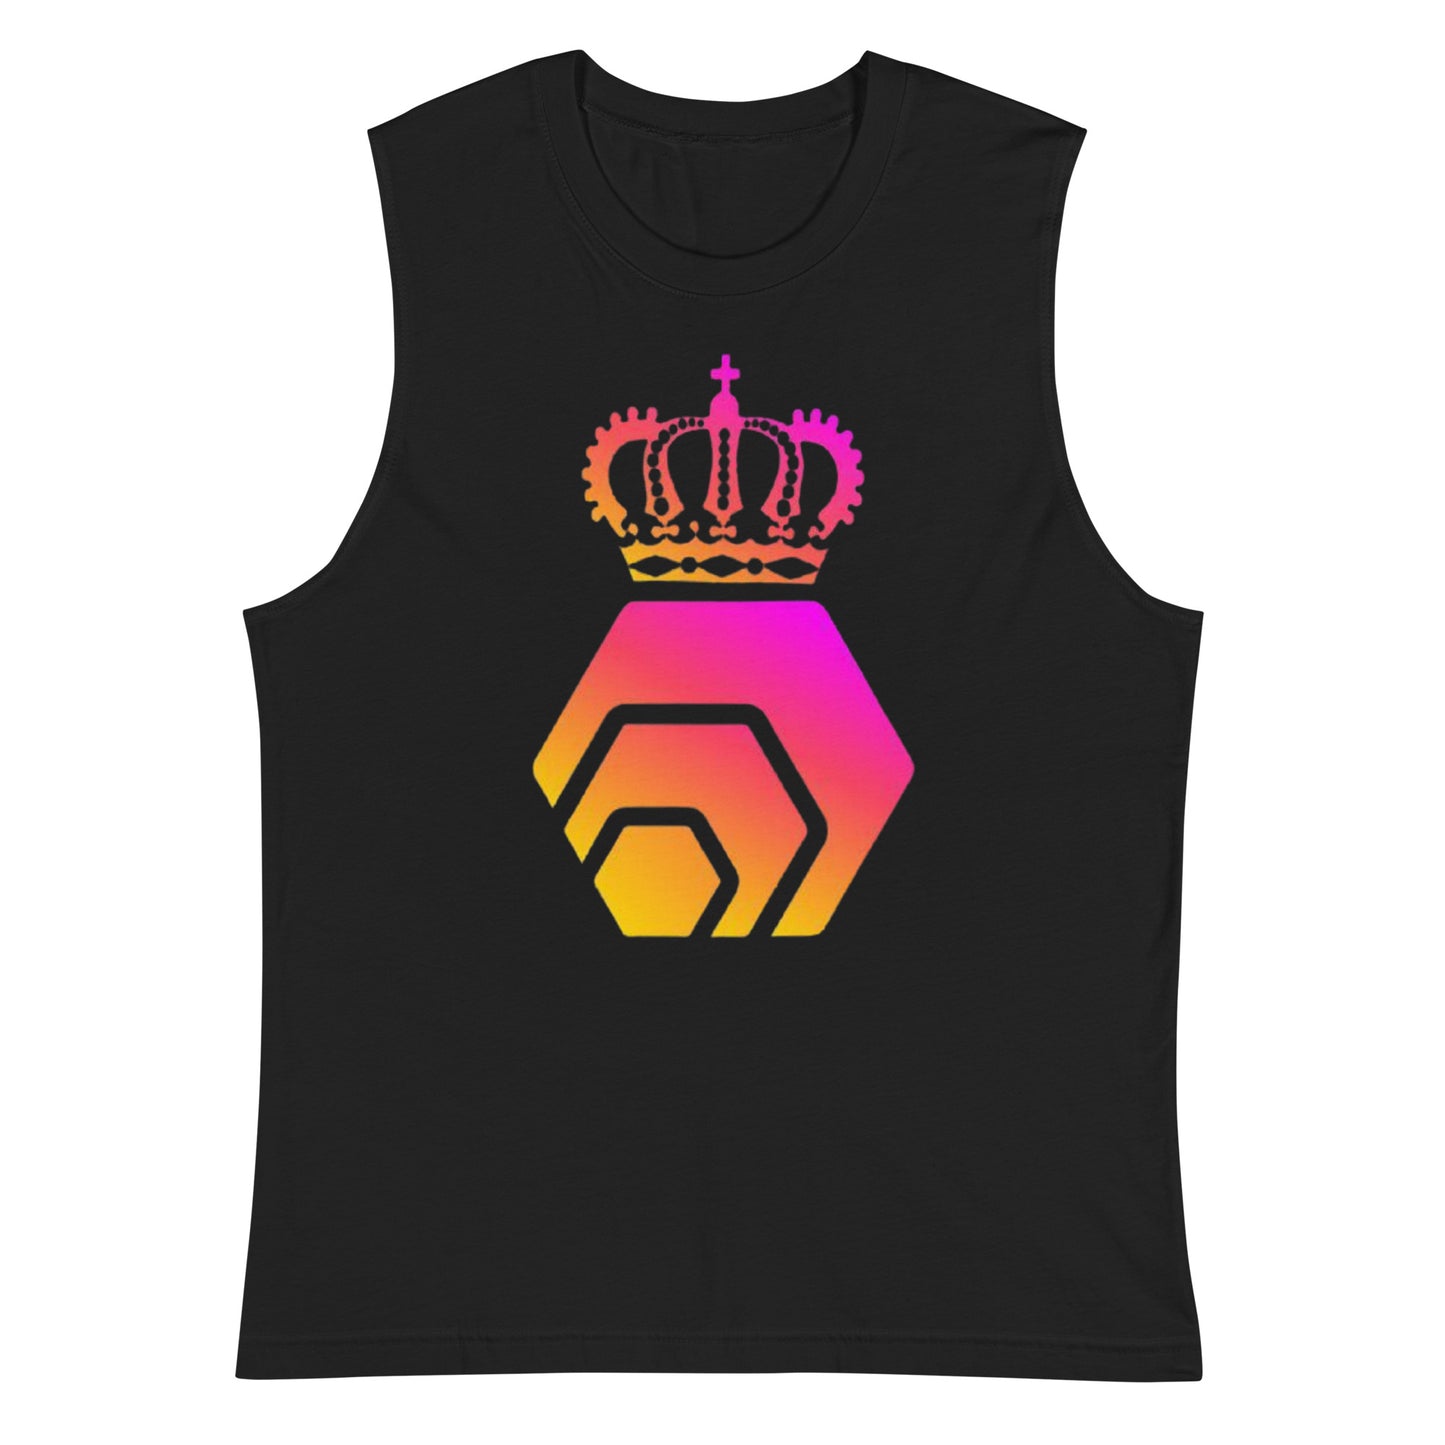 HEX Is King Unisex Muscle Shirt